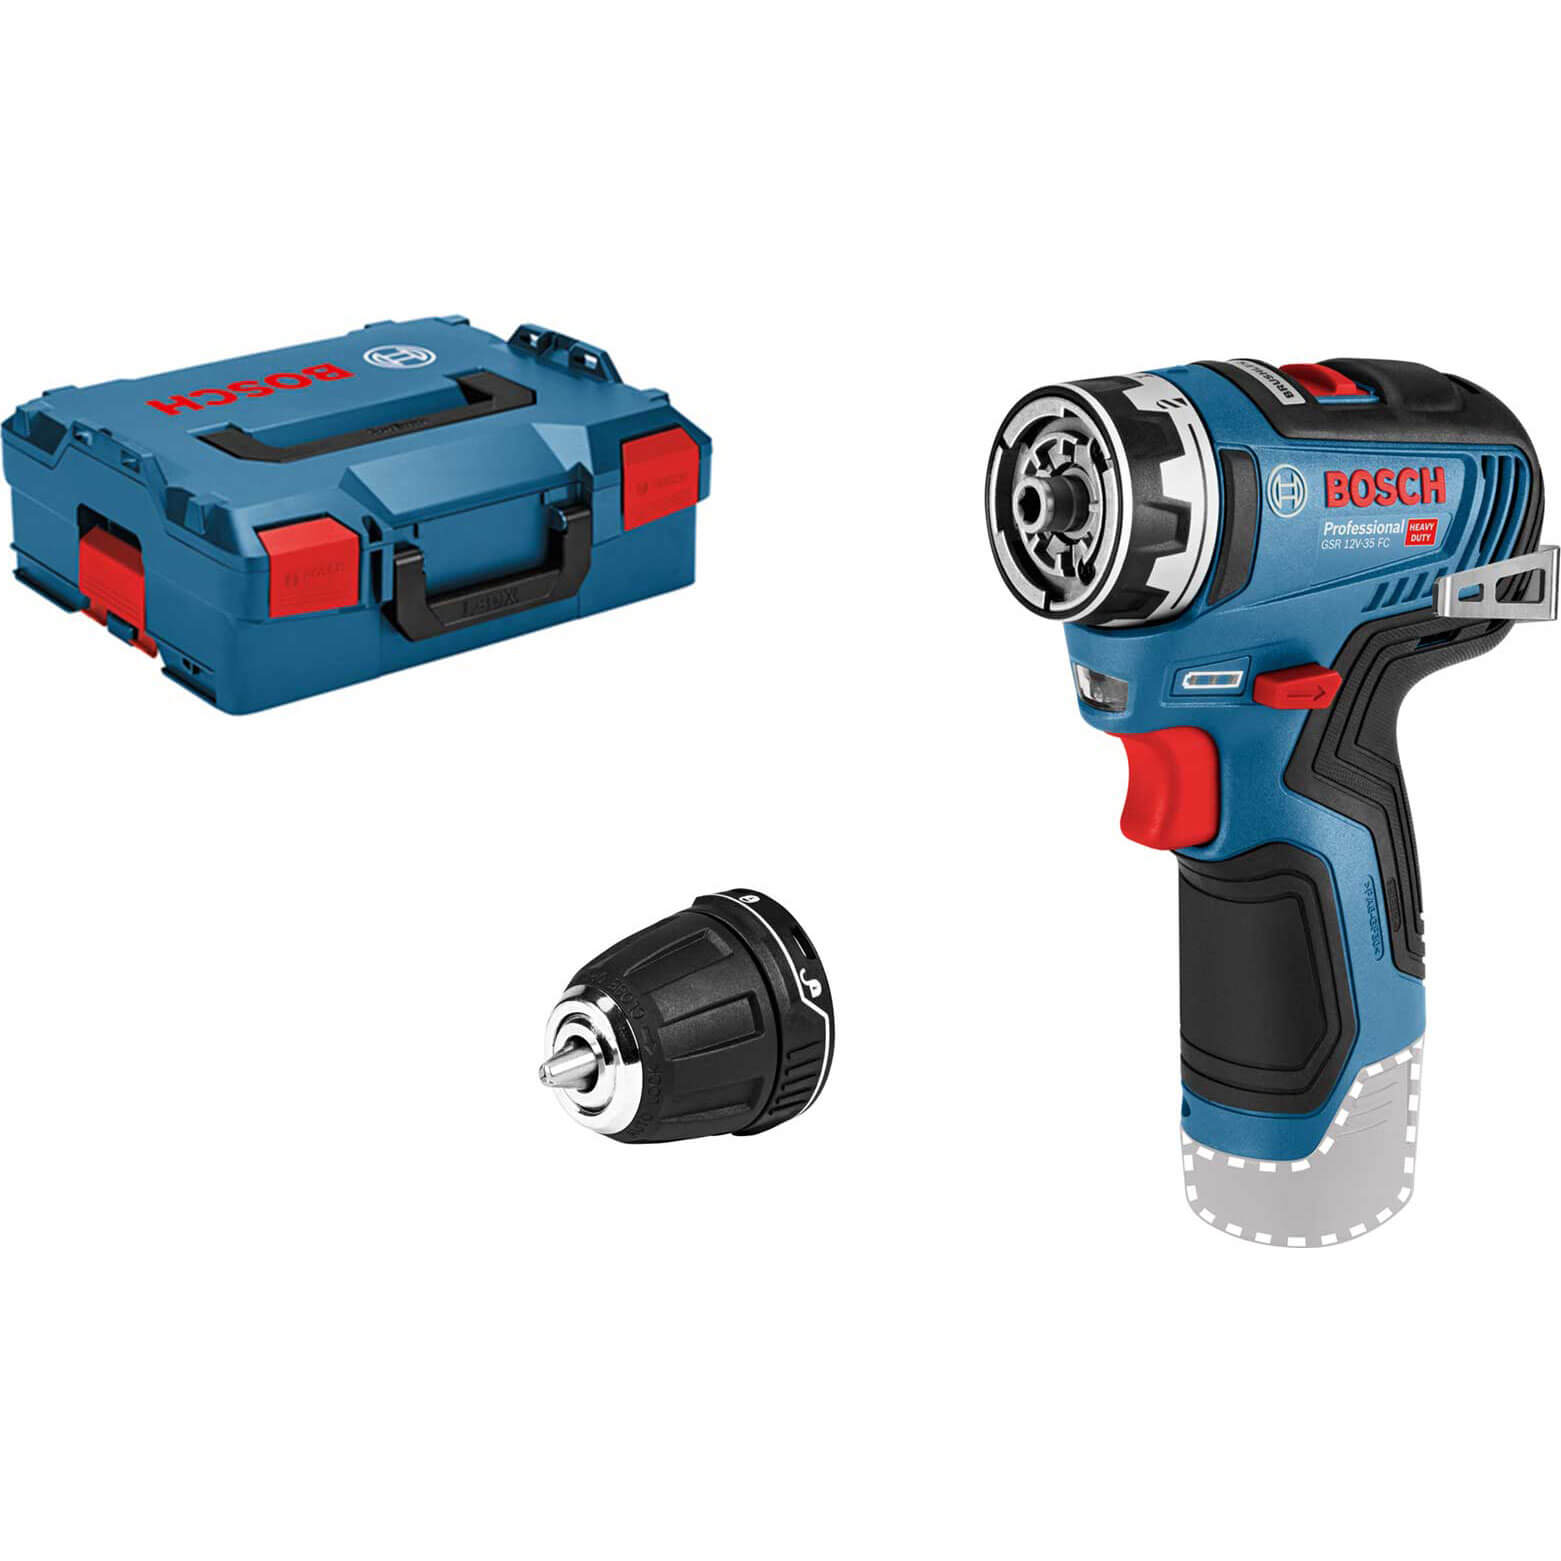 Image of Bosch GSR 12V-35 FC 12v Cordless Brushless Drill Driver No Batteries No Charger Case